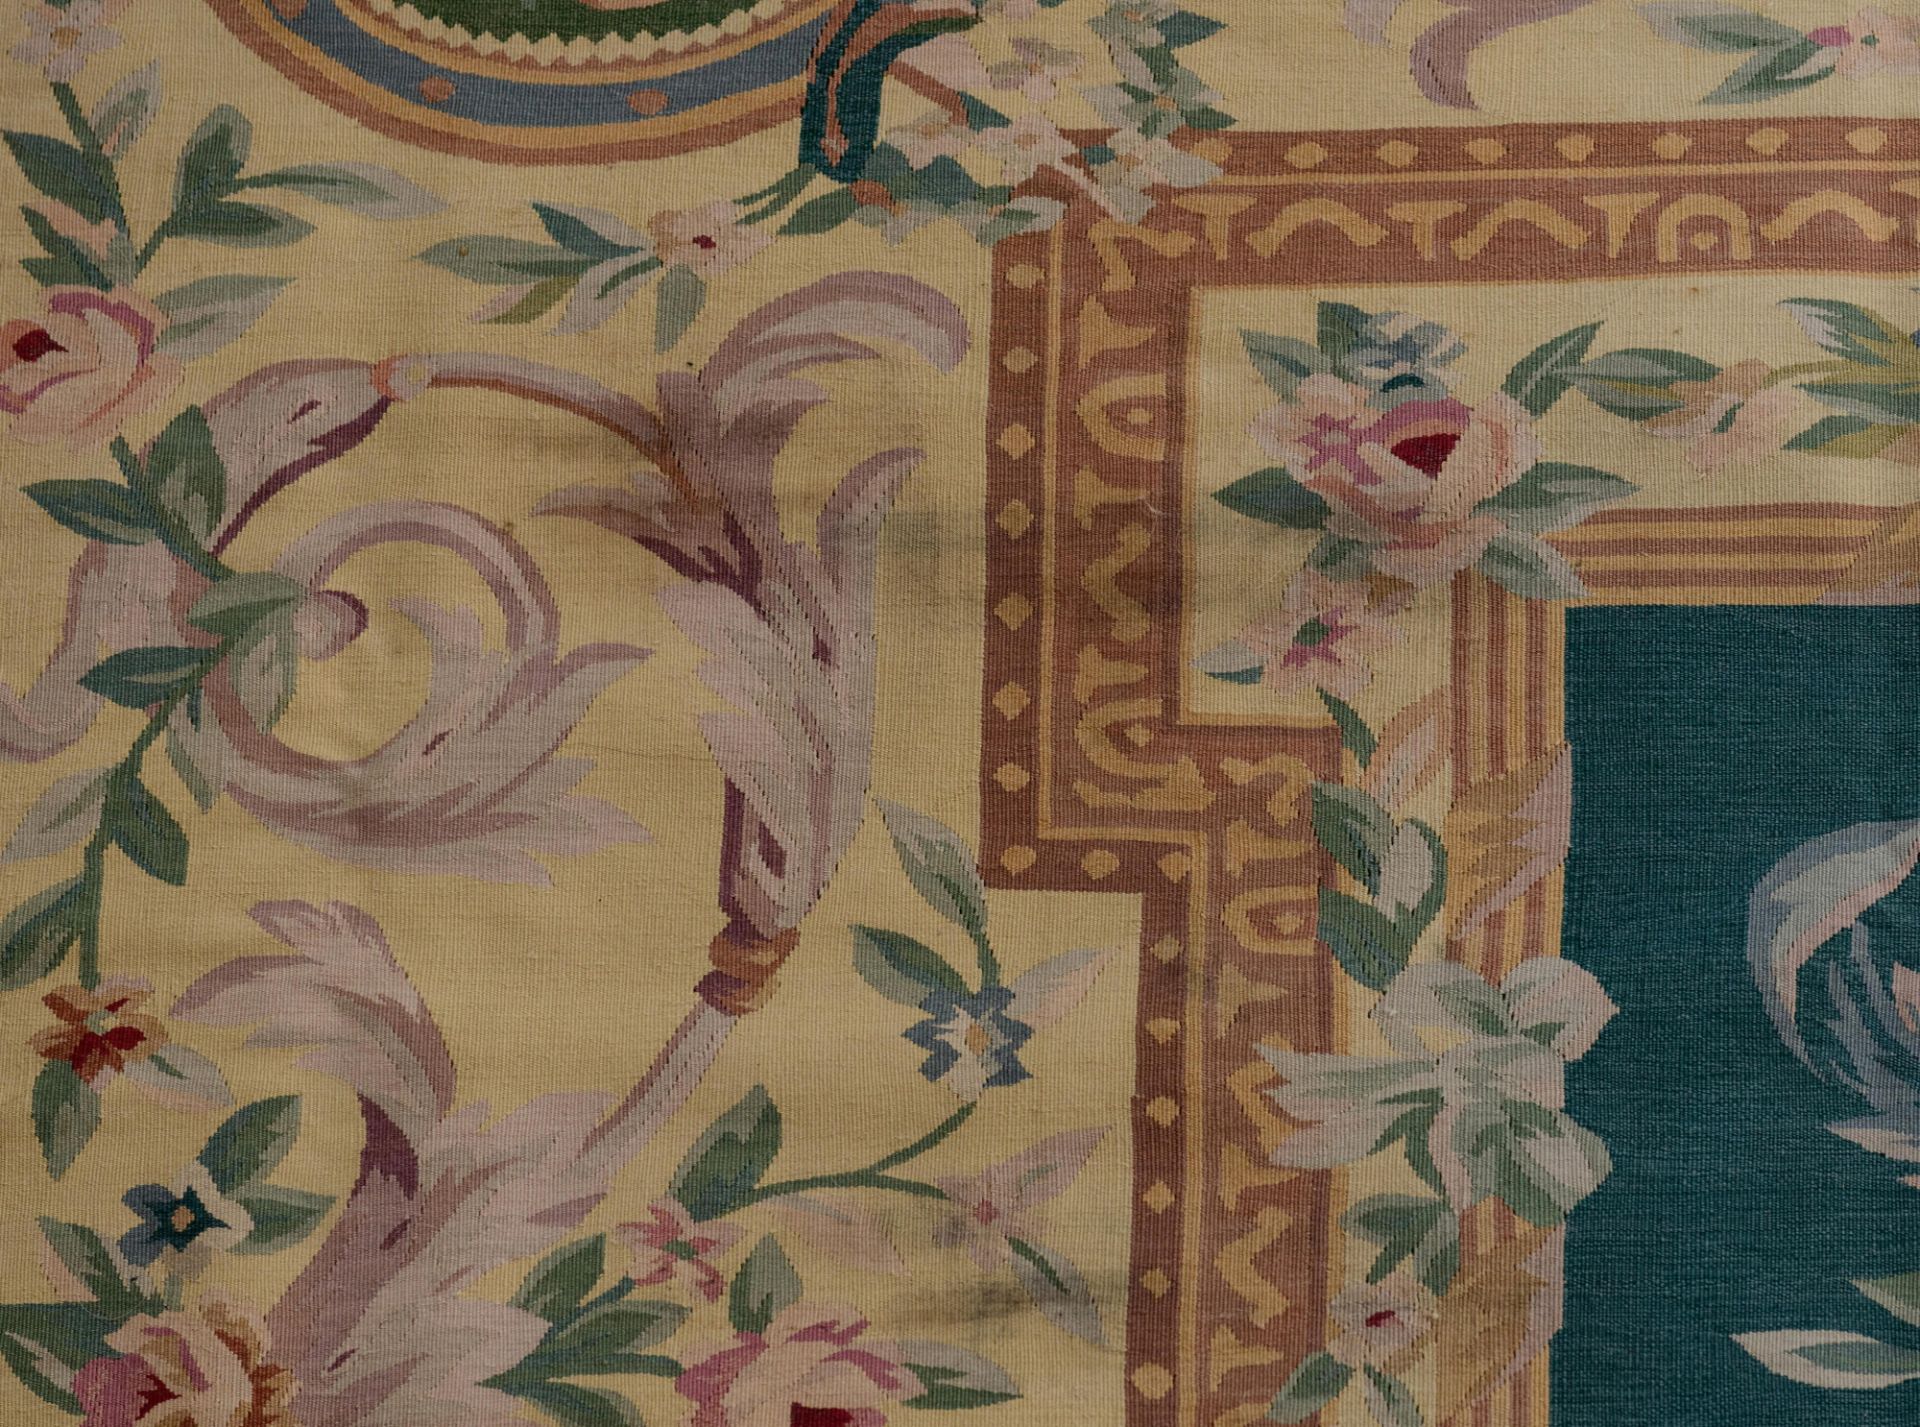 A large Aubusson rug, 553 x 370 cm - Image 9 of 9